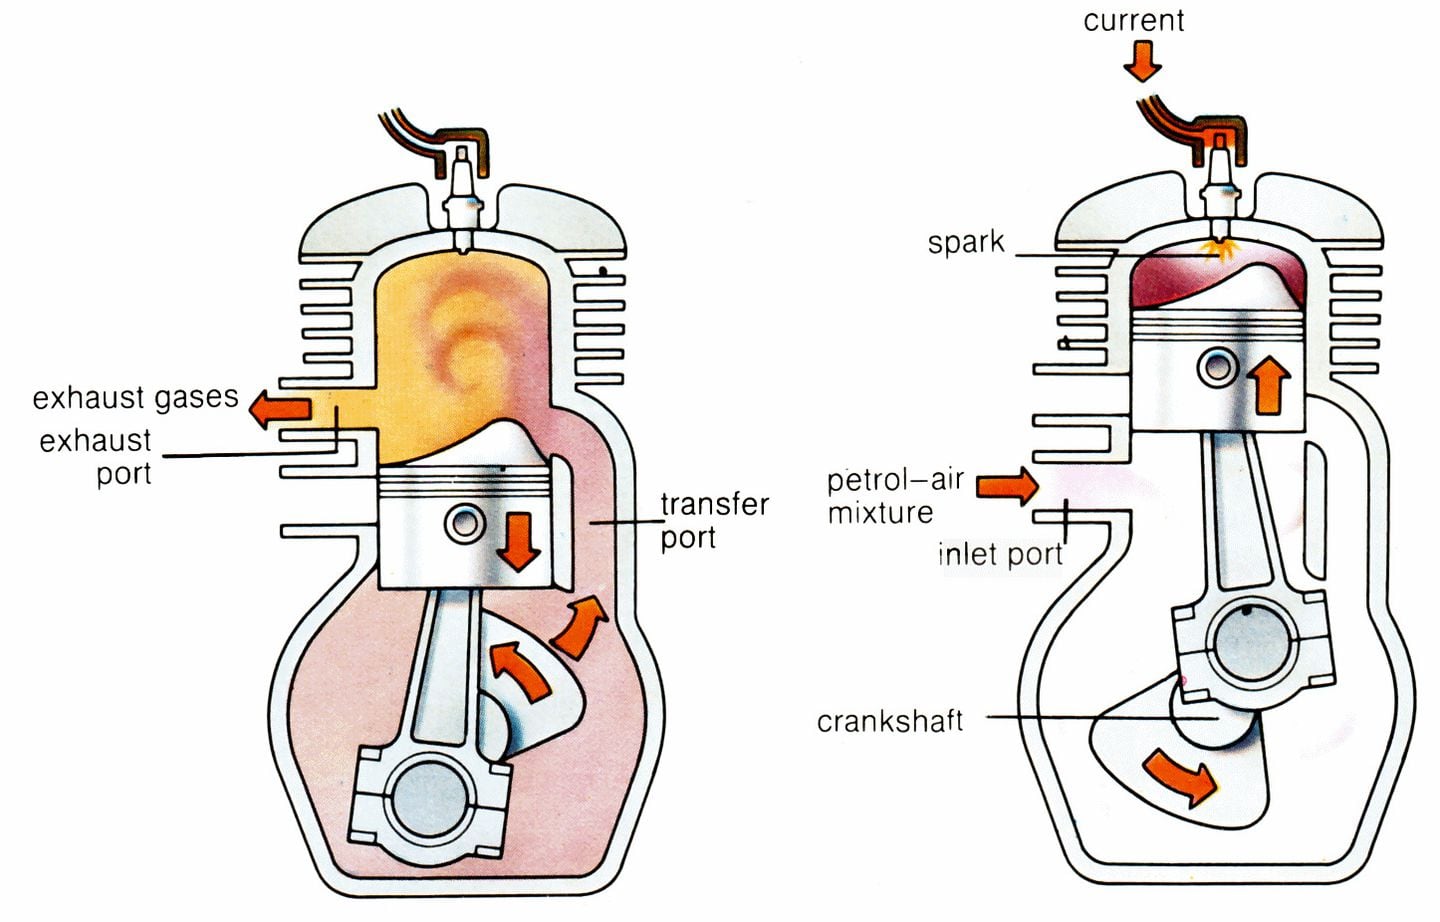 Understanding Four-Cylinder Engines: An Overview Of How They Work